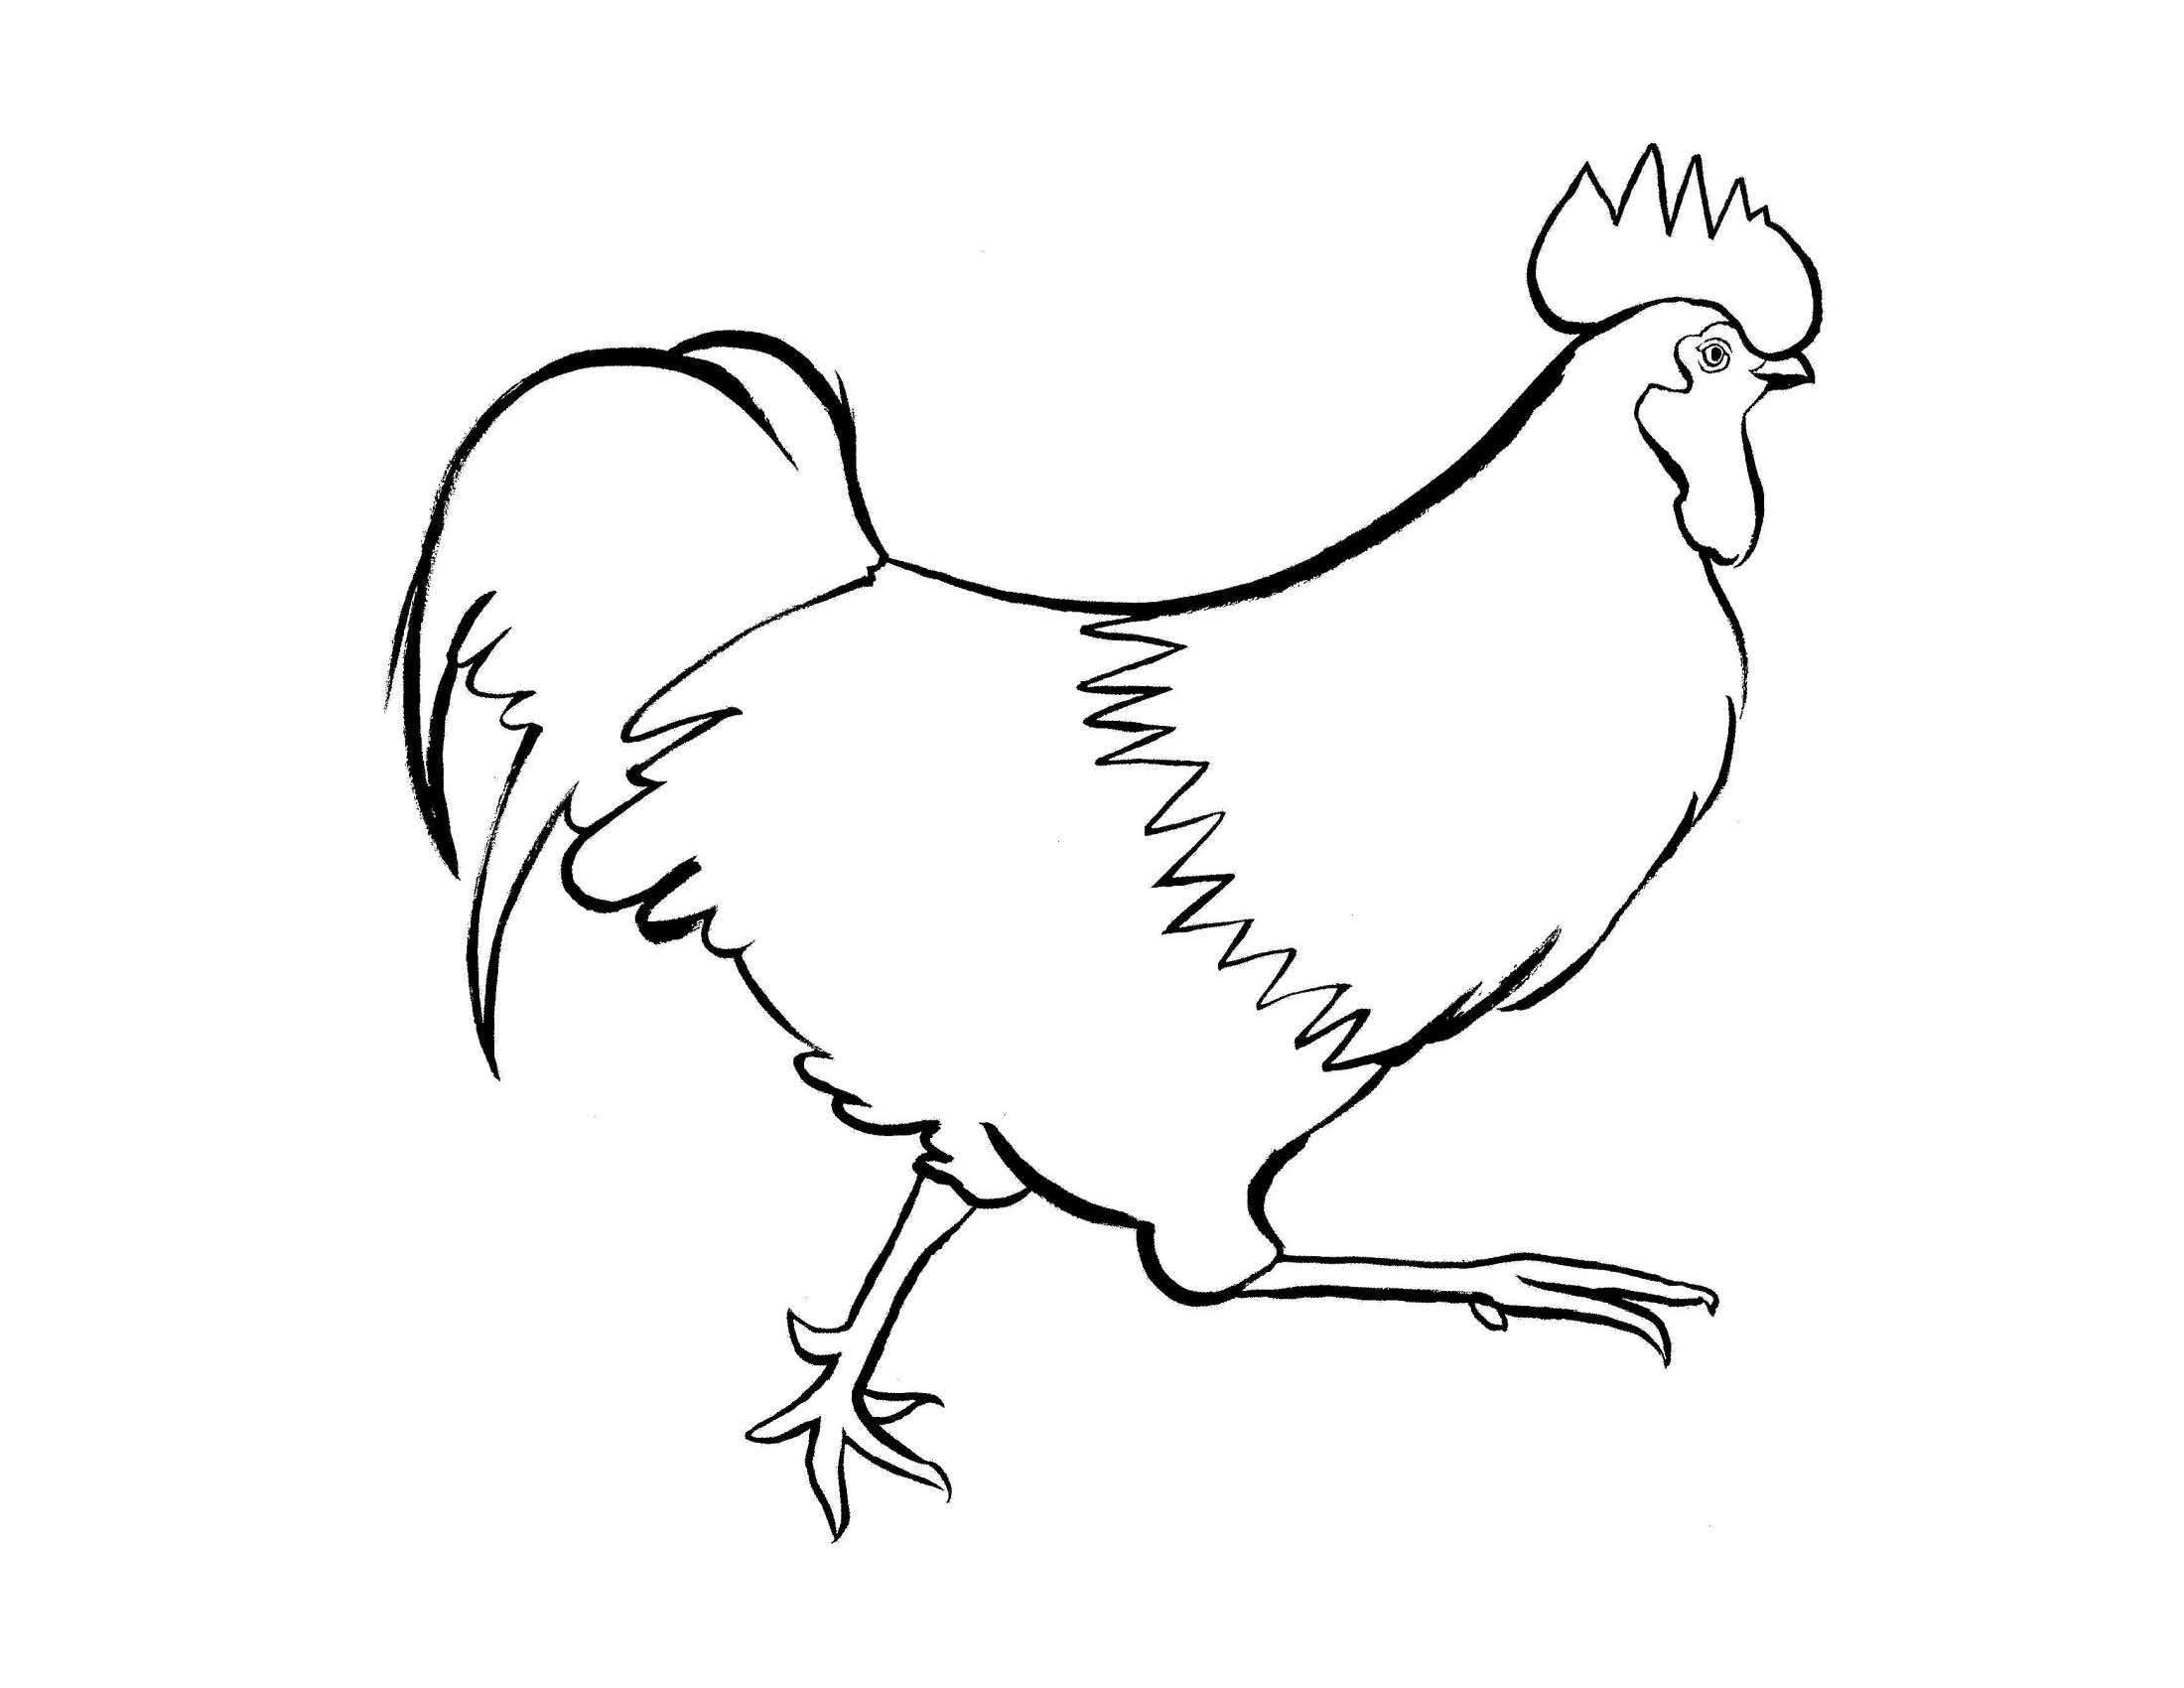 Rooster Coloring Activity for Elderly Adults with Dementia and Alzheimer's